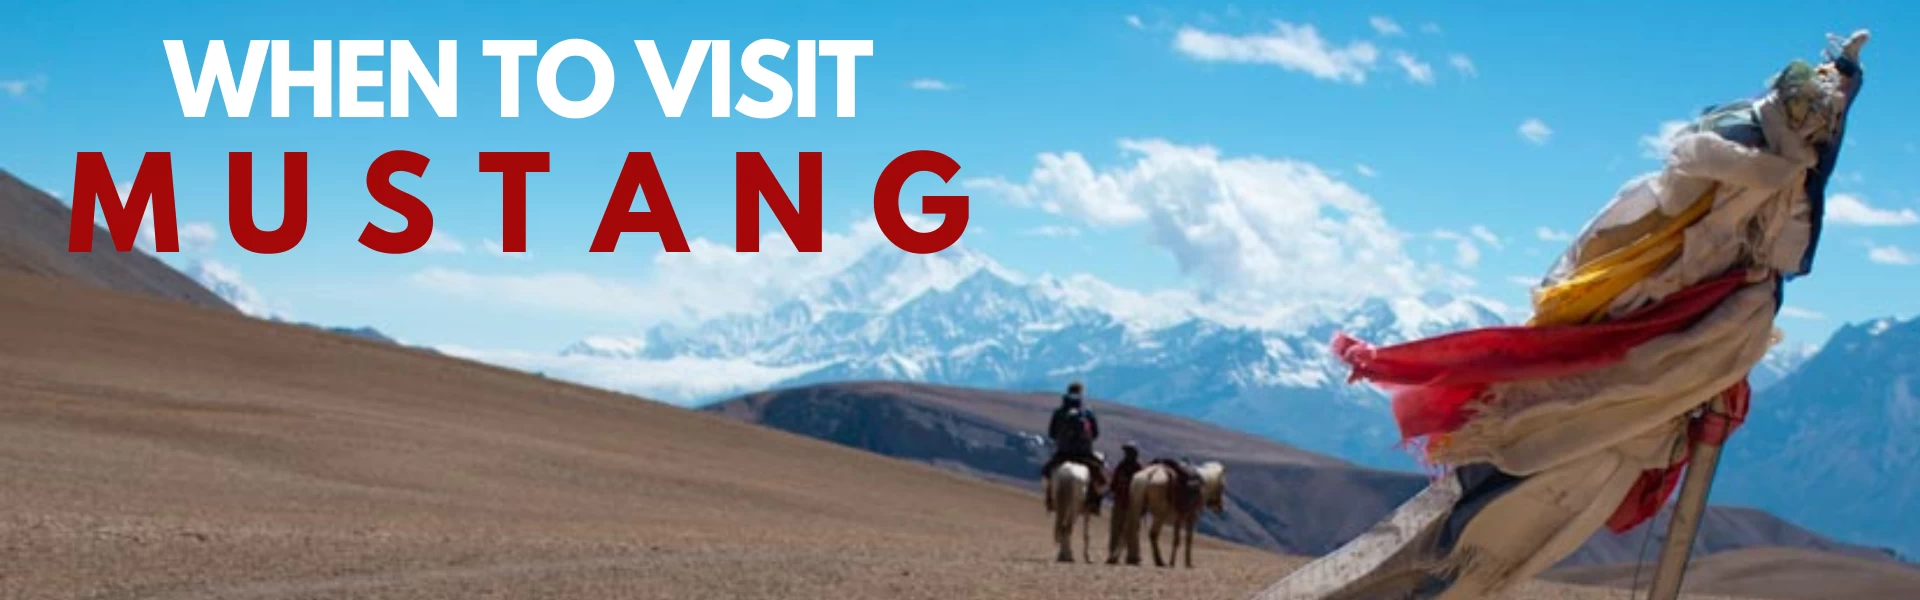 when to visit mustang